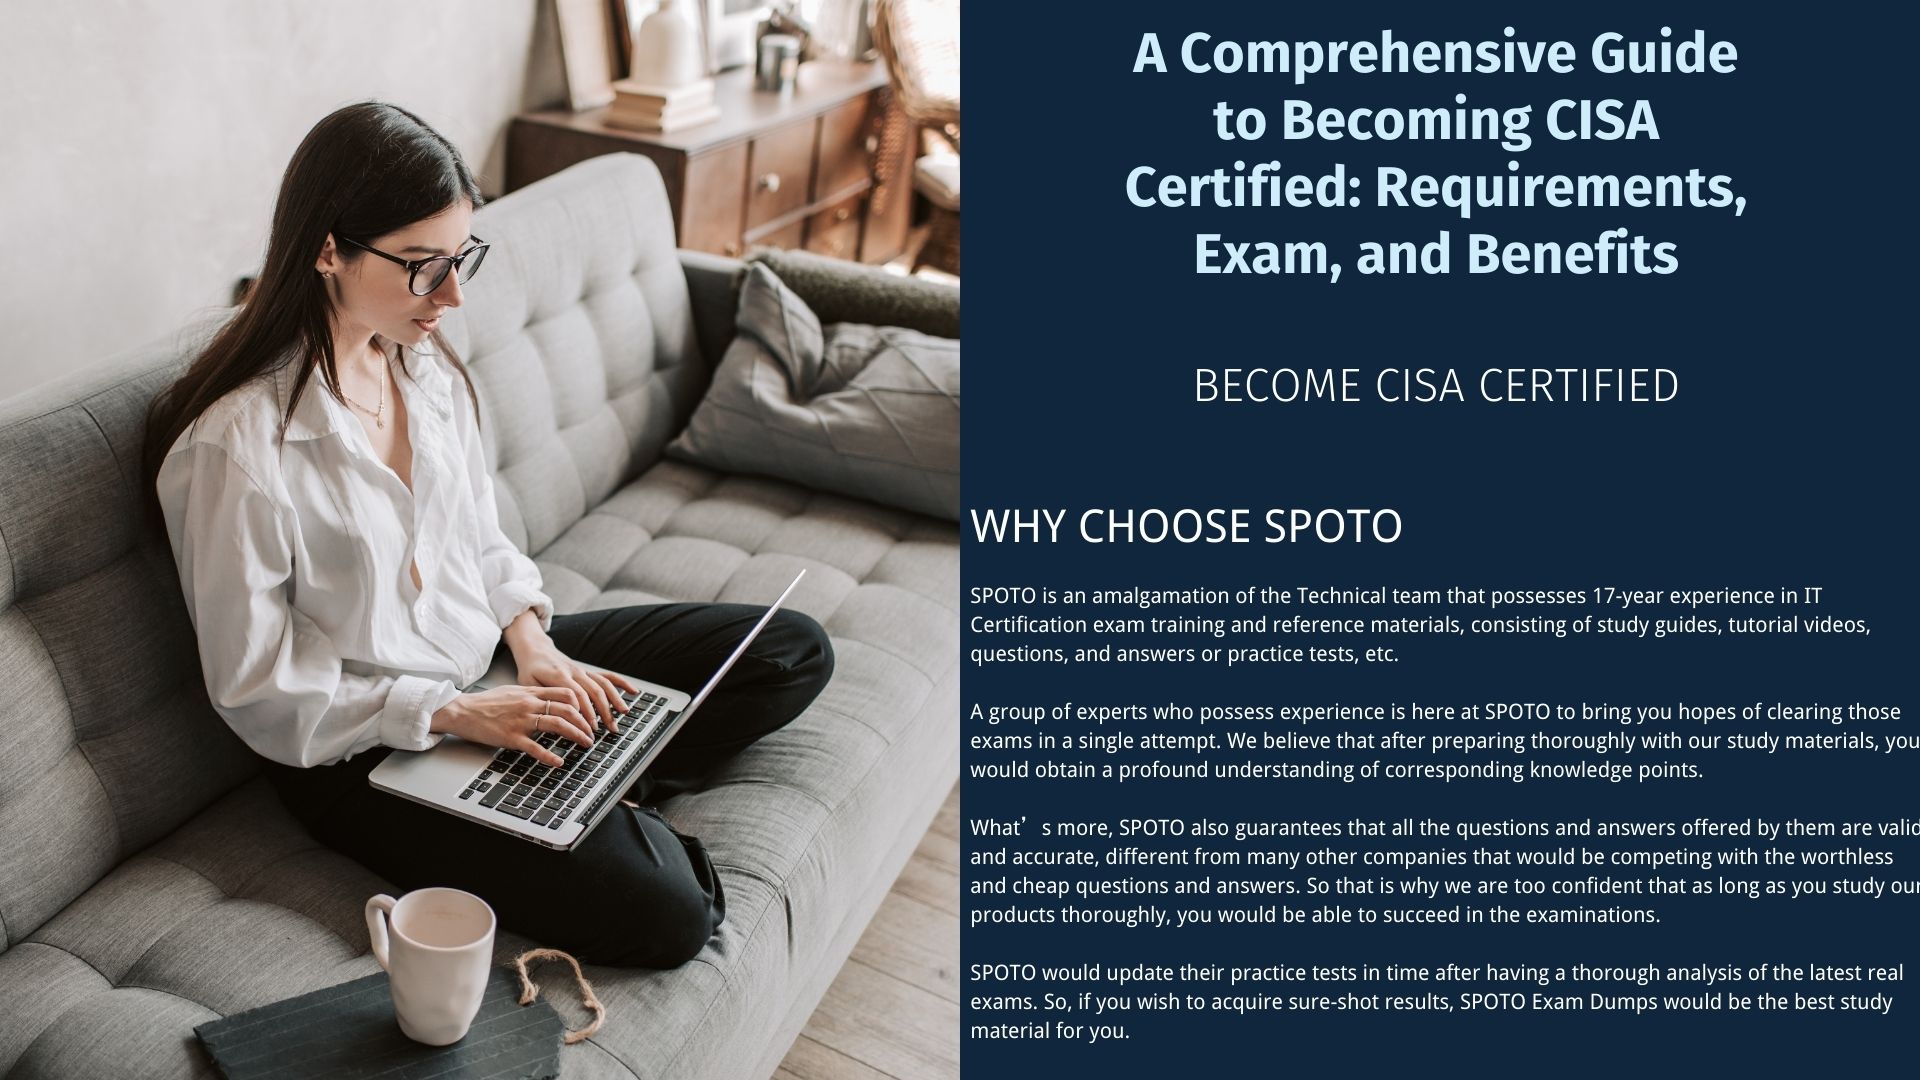 CISA Certified Requirements, Exam, and Benefits